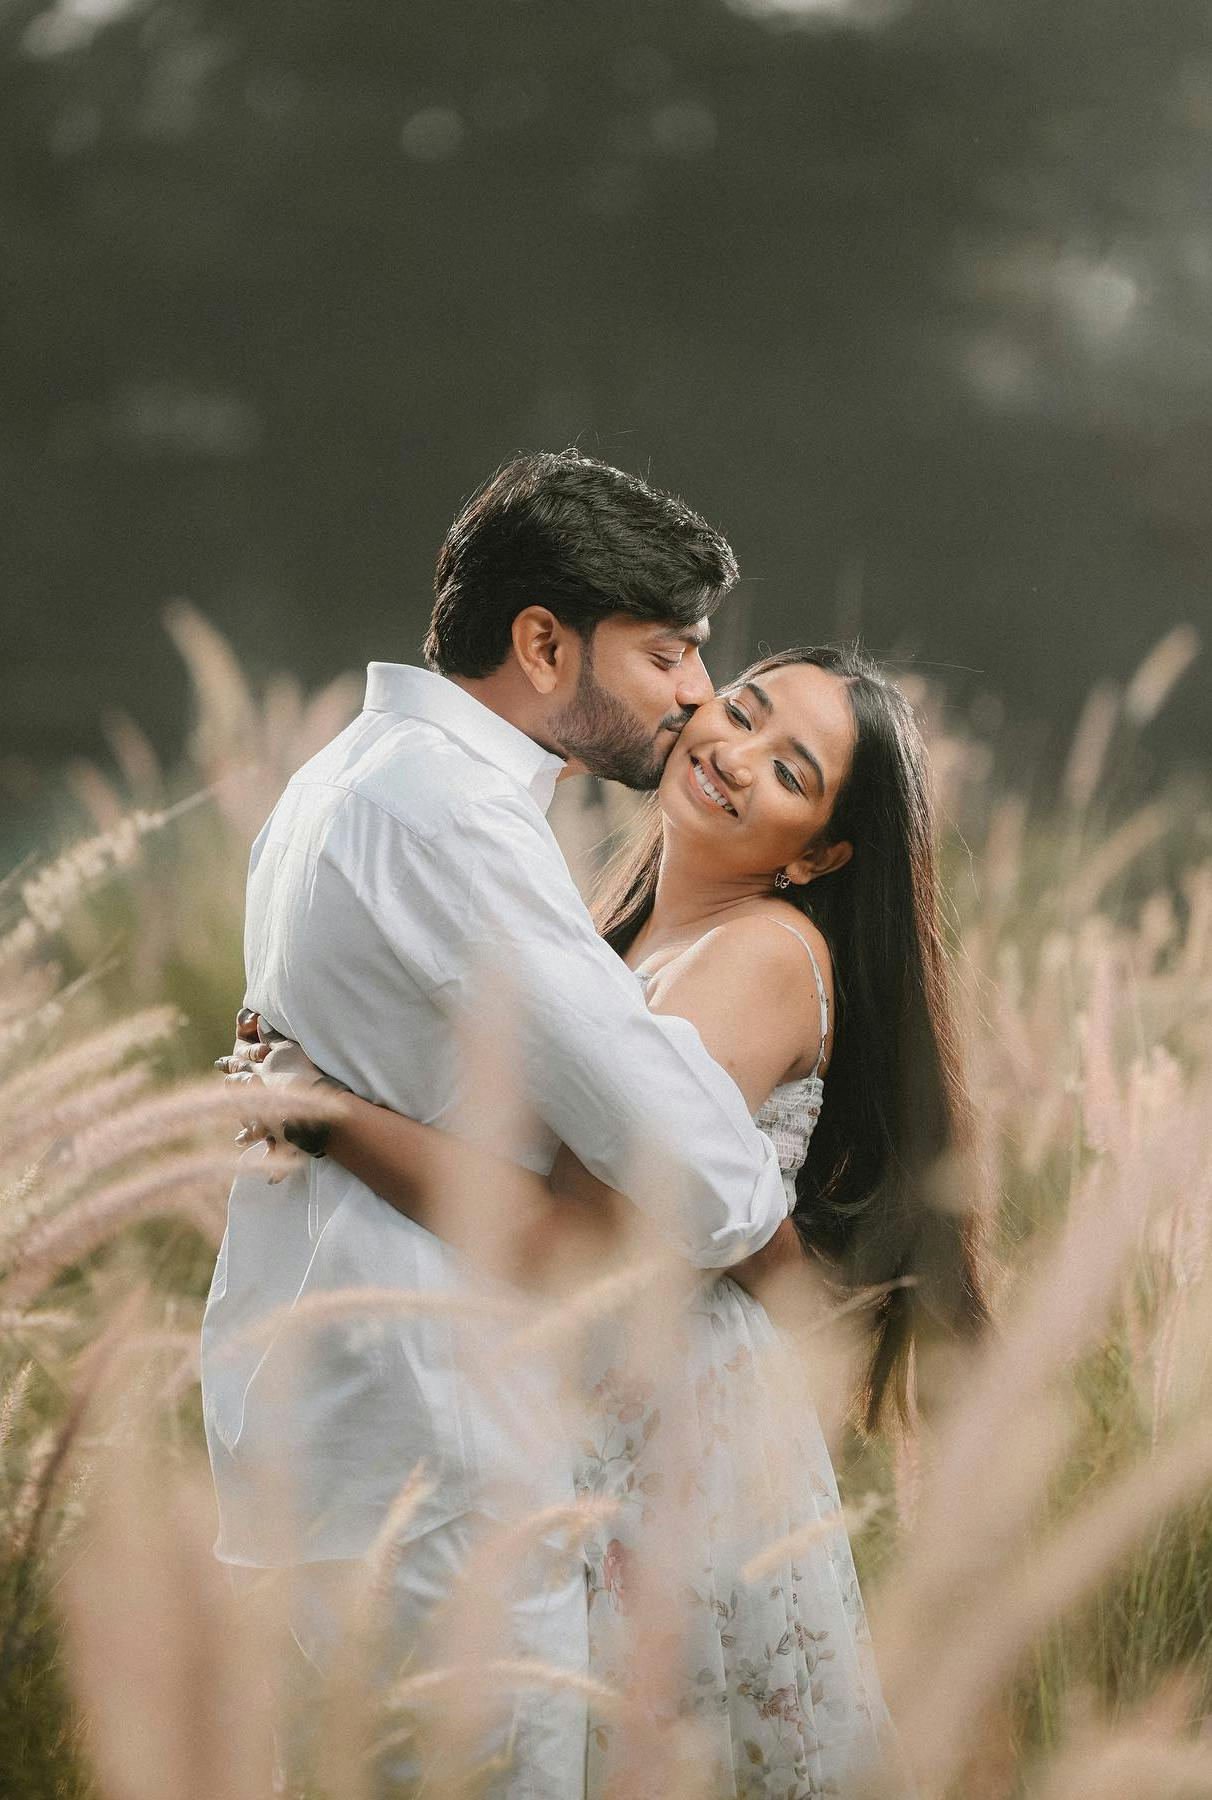 Best place for pre-wedding shoot in Kolkata
